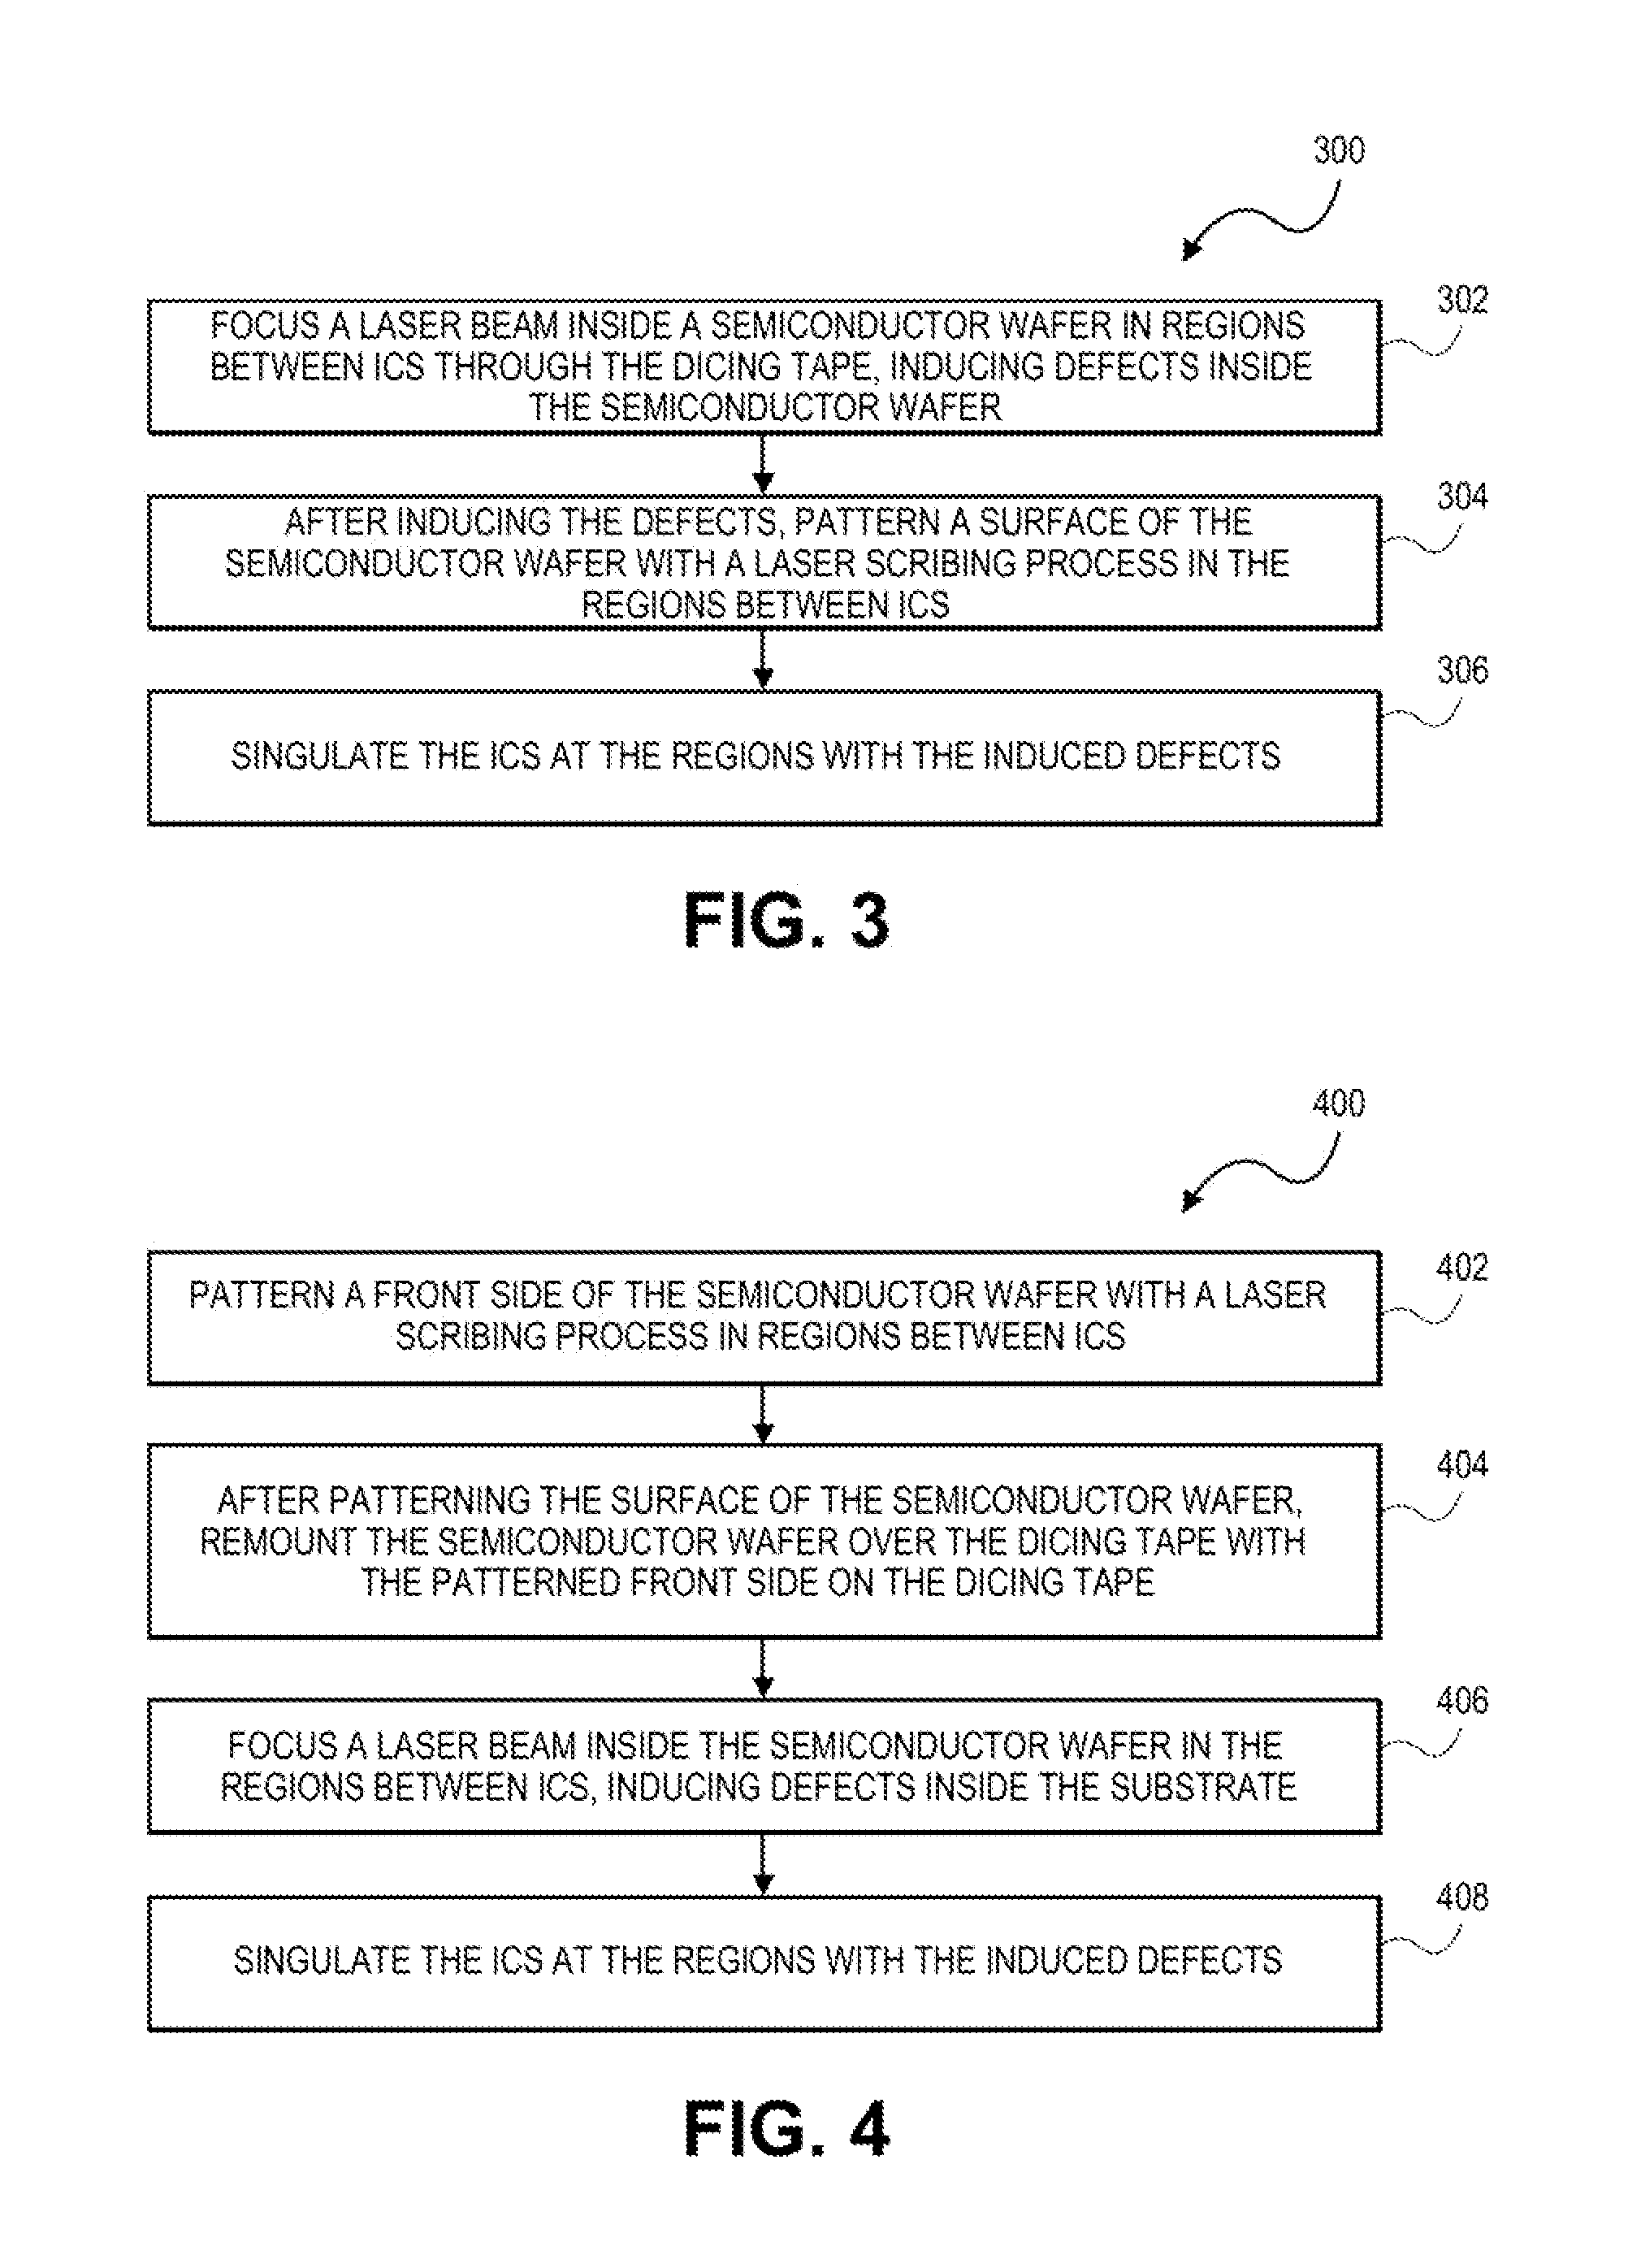 Method of die singulation using laser ablation and induction of internal defects with a laser